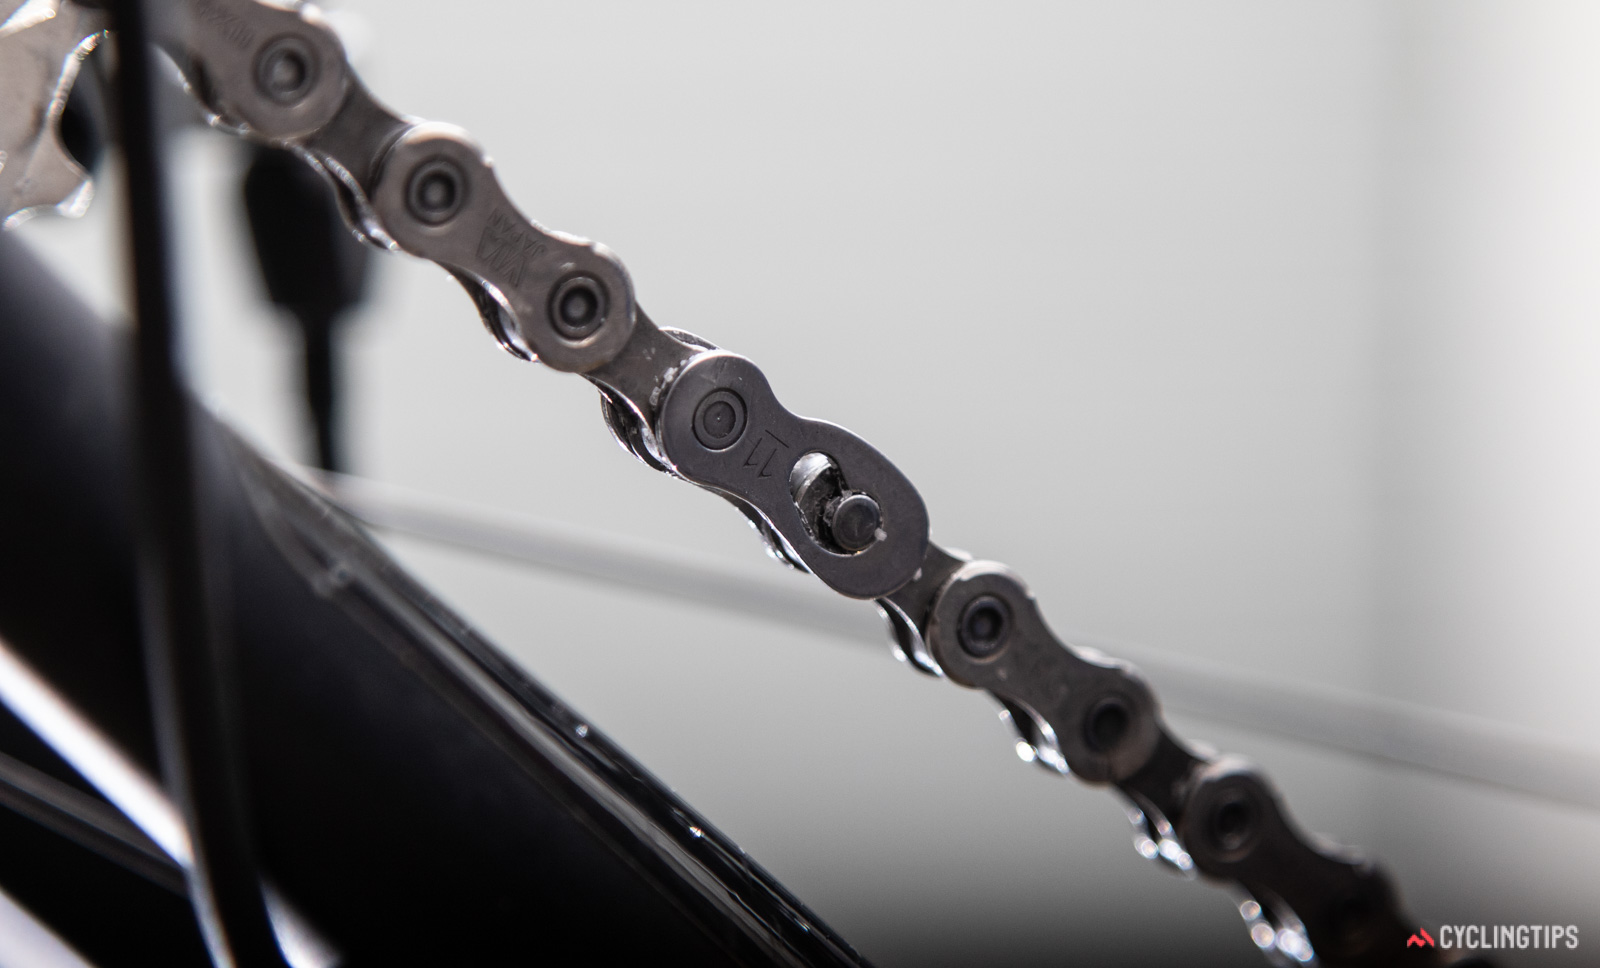 Your chain is connected by way of a quick link or a joining pin which is where you need to undo it.